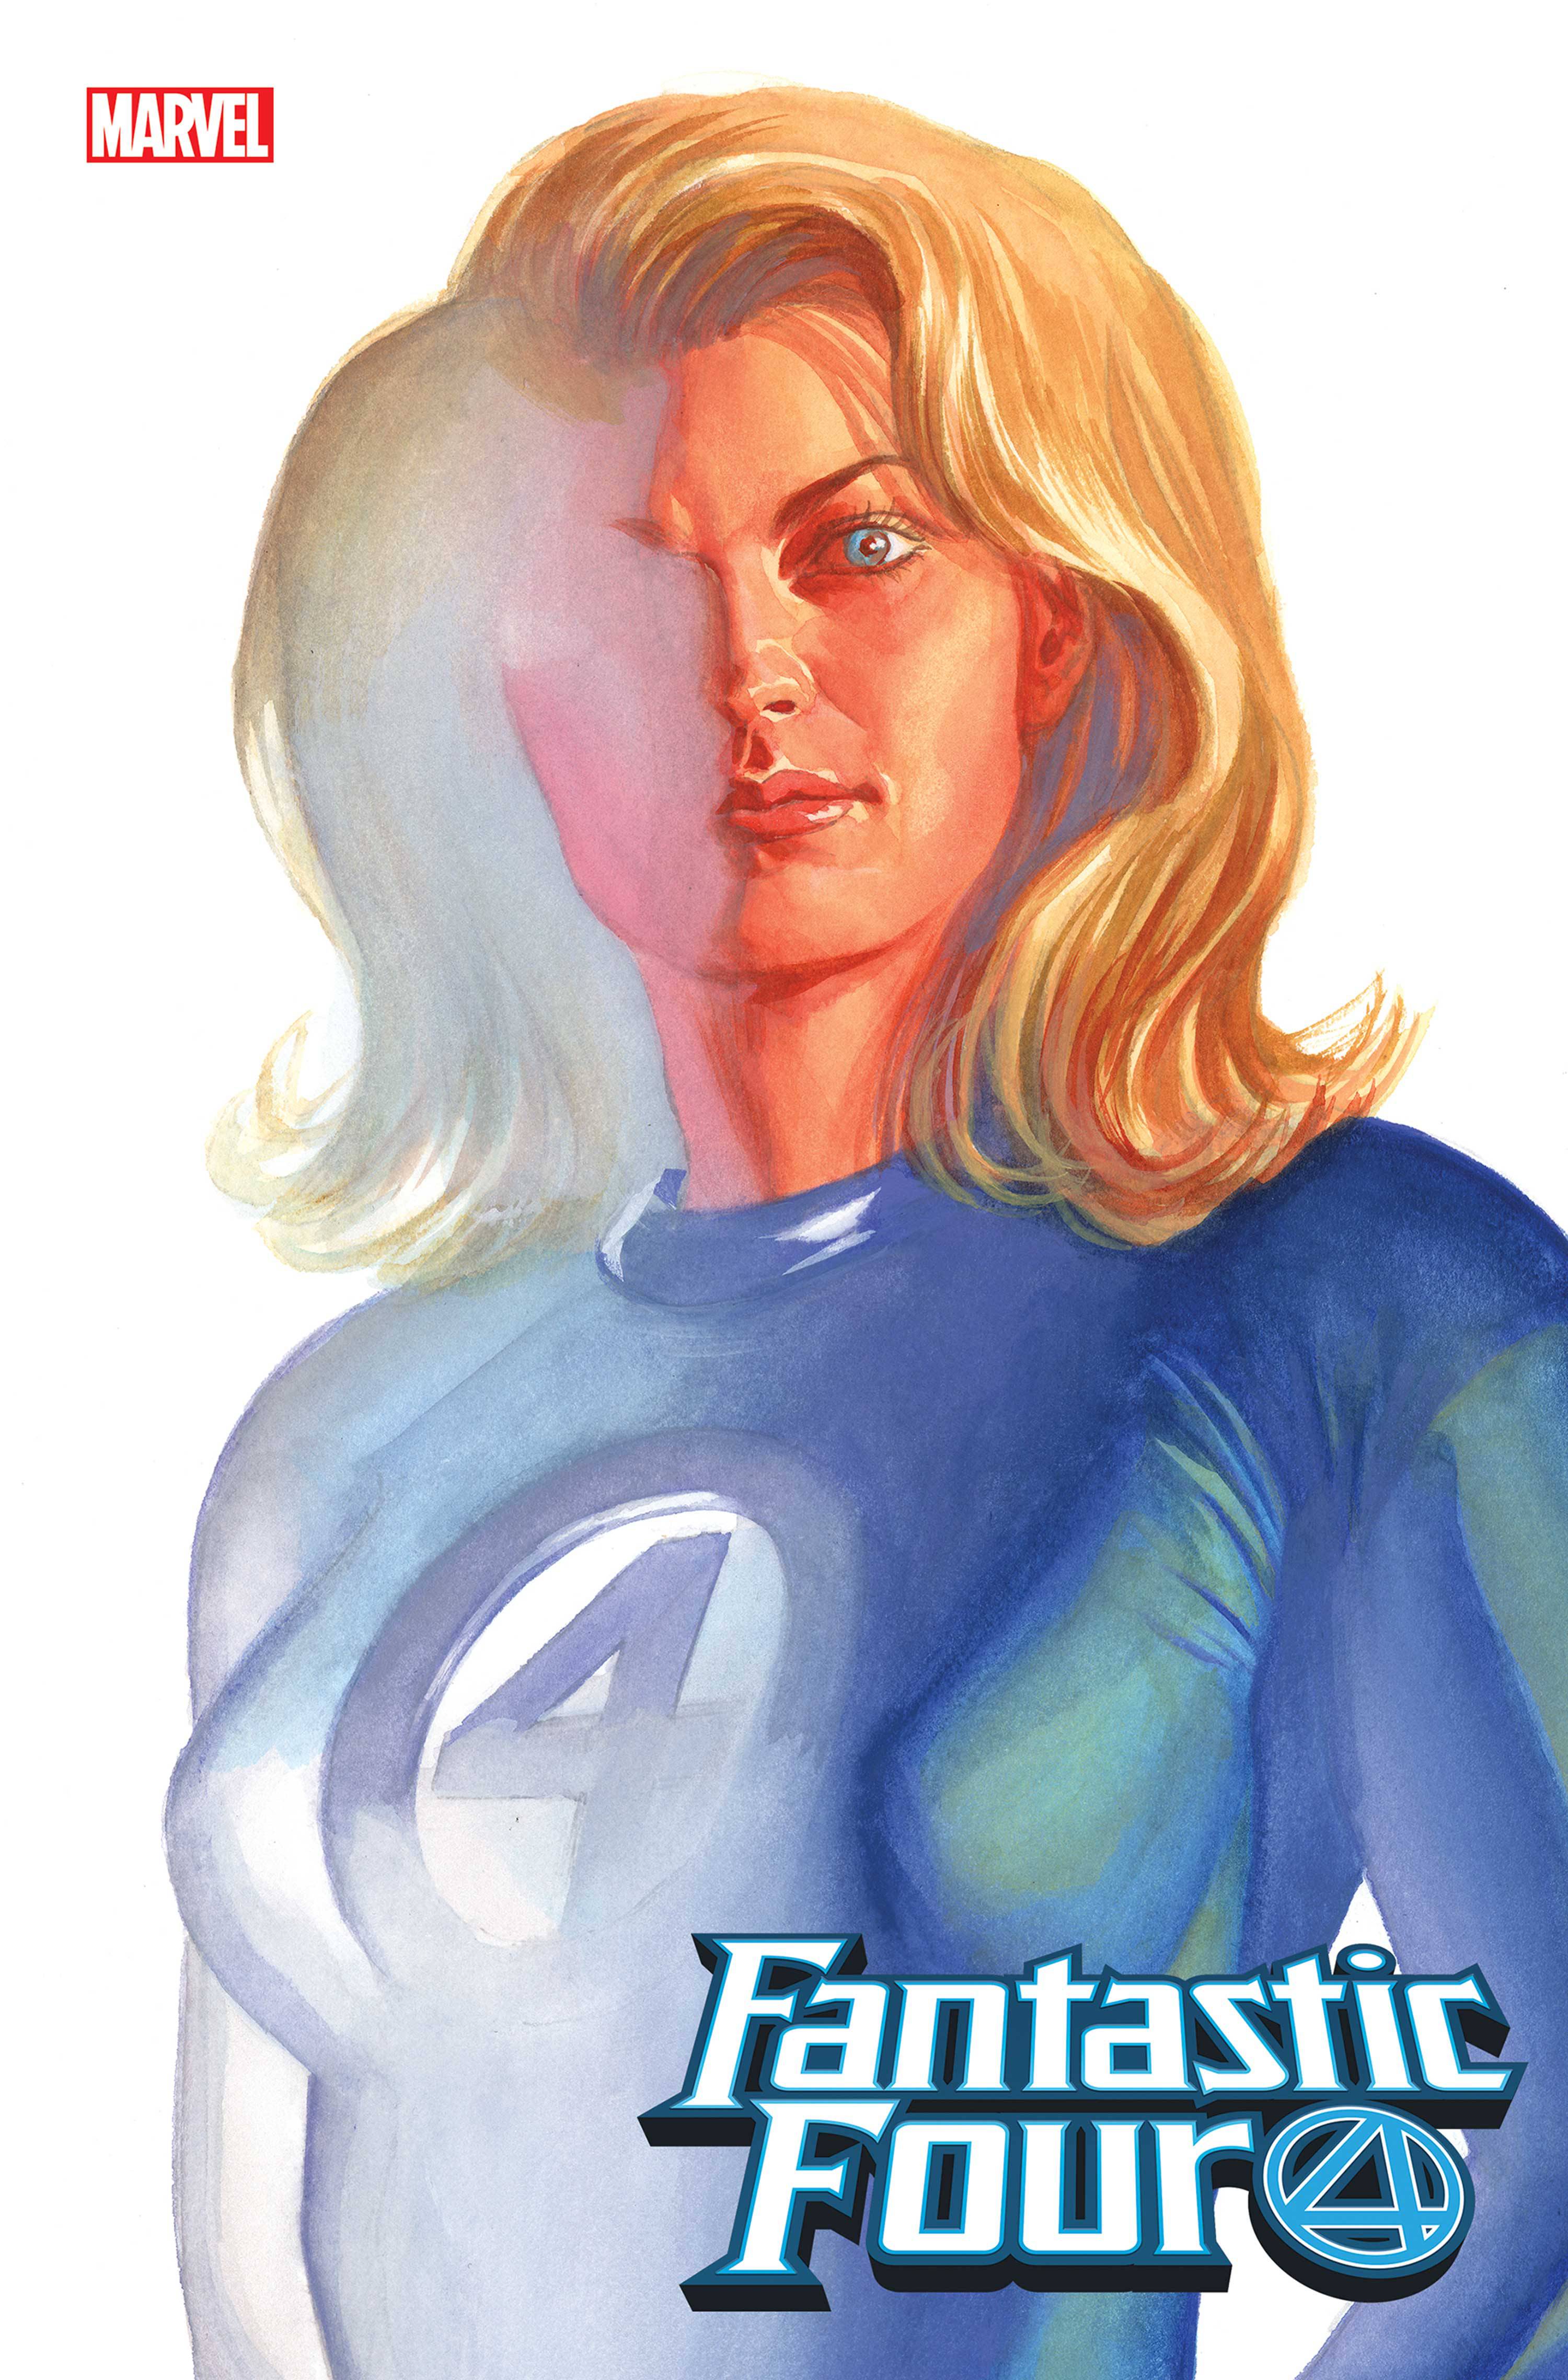 FANTASTIC FOUR #24 ALEX ROSS INVISIBLE WOMAN TIMELESS VARIANT 09/30/20